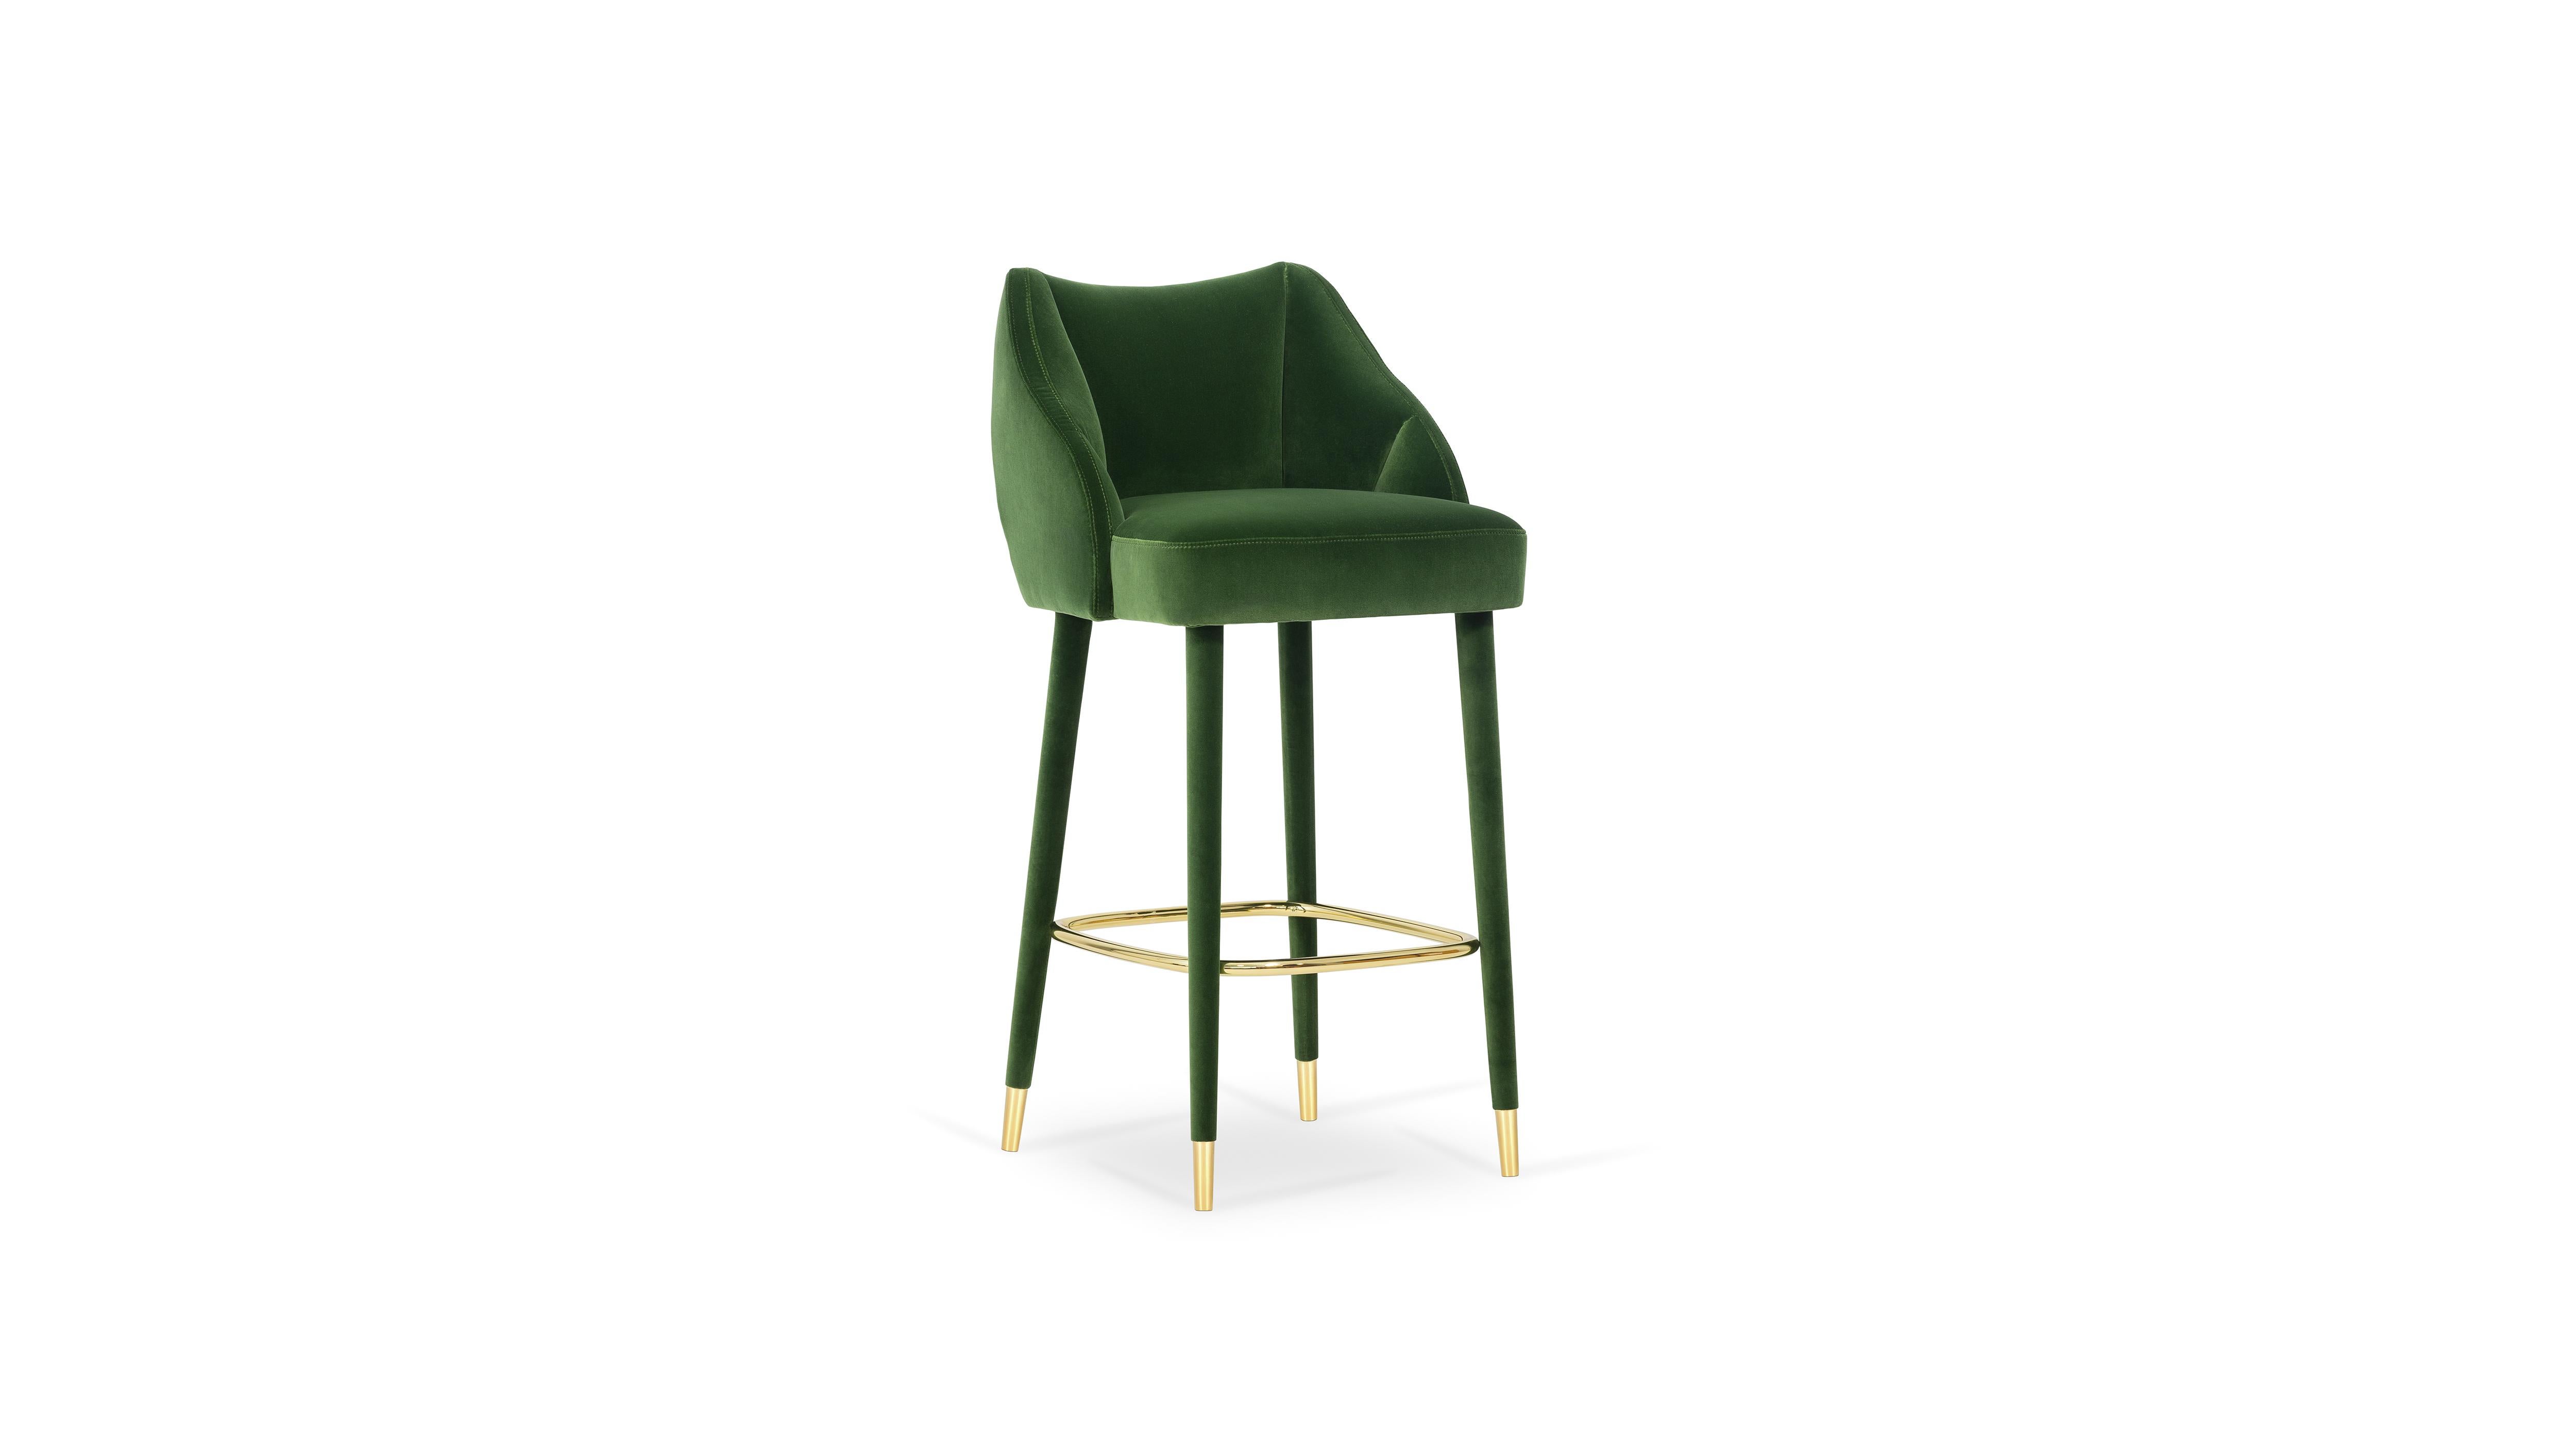 Figueroa Bar Stool by InsidherLand
Dimensions: D 54 x W 53 x H 107 cm.
Materials: polished brass, InsidherLand Cotton Velvet Ref.CV 0790 fabric.
11 kg.
Available in different fabrics.

Located in the sunny California on the south-west of the United